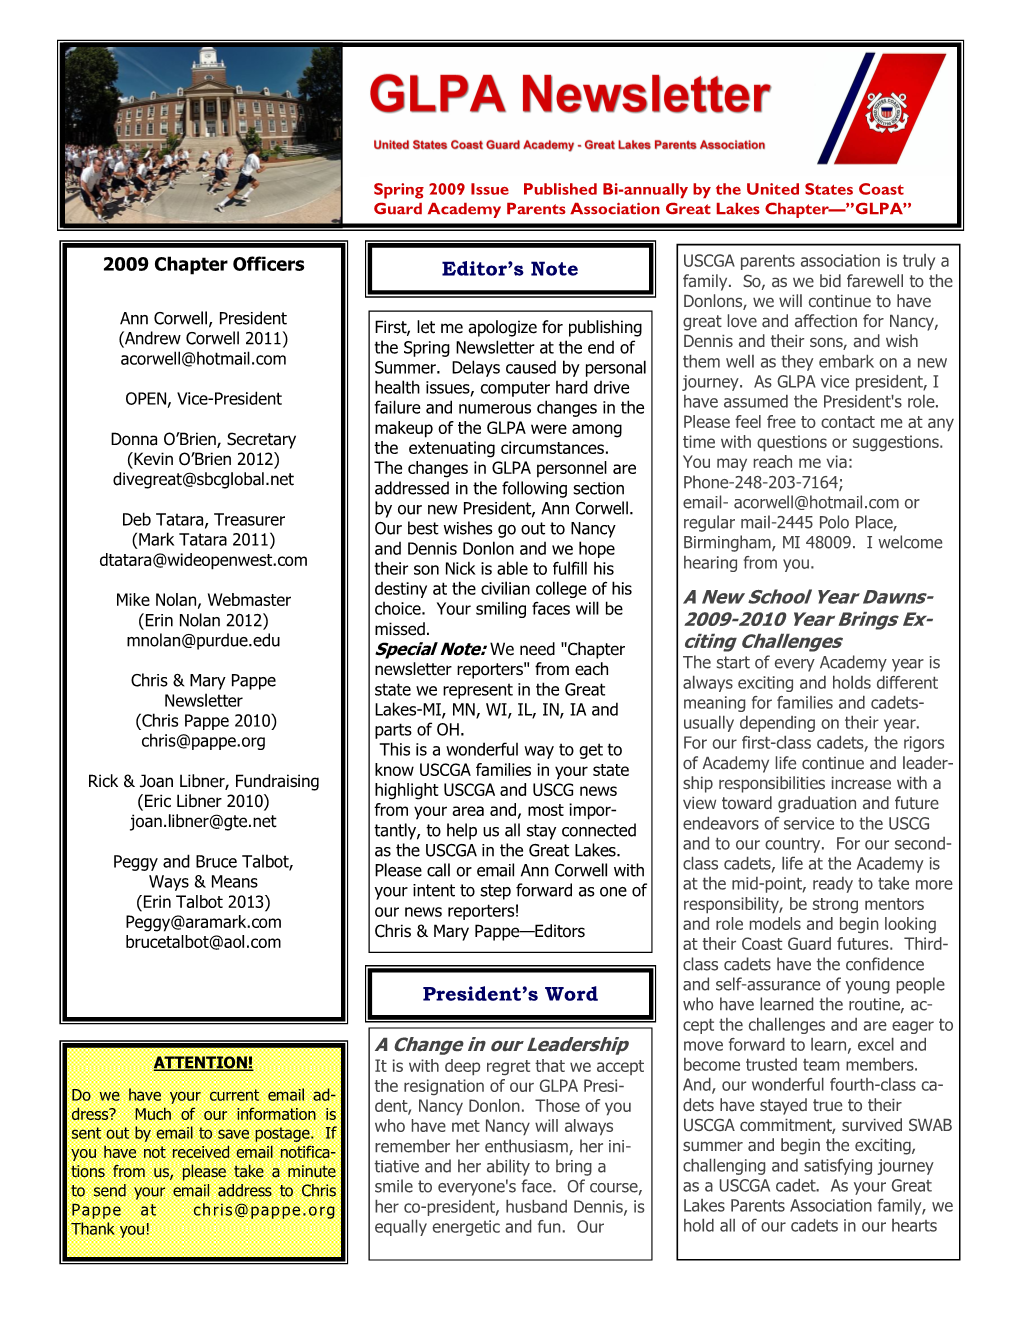 Spring 2009 Issue Published Bi-Annually by the United States Coast Guard Academy Parents Association Great Lakes Chapter—”GLPA”